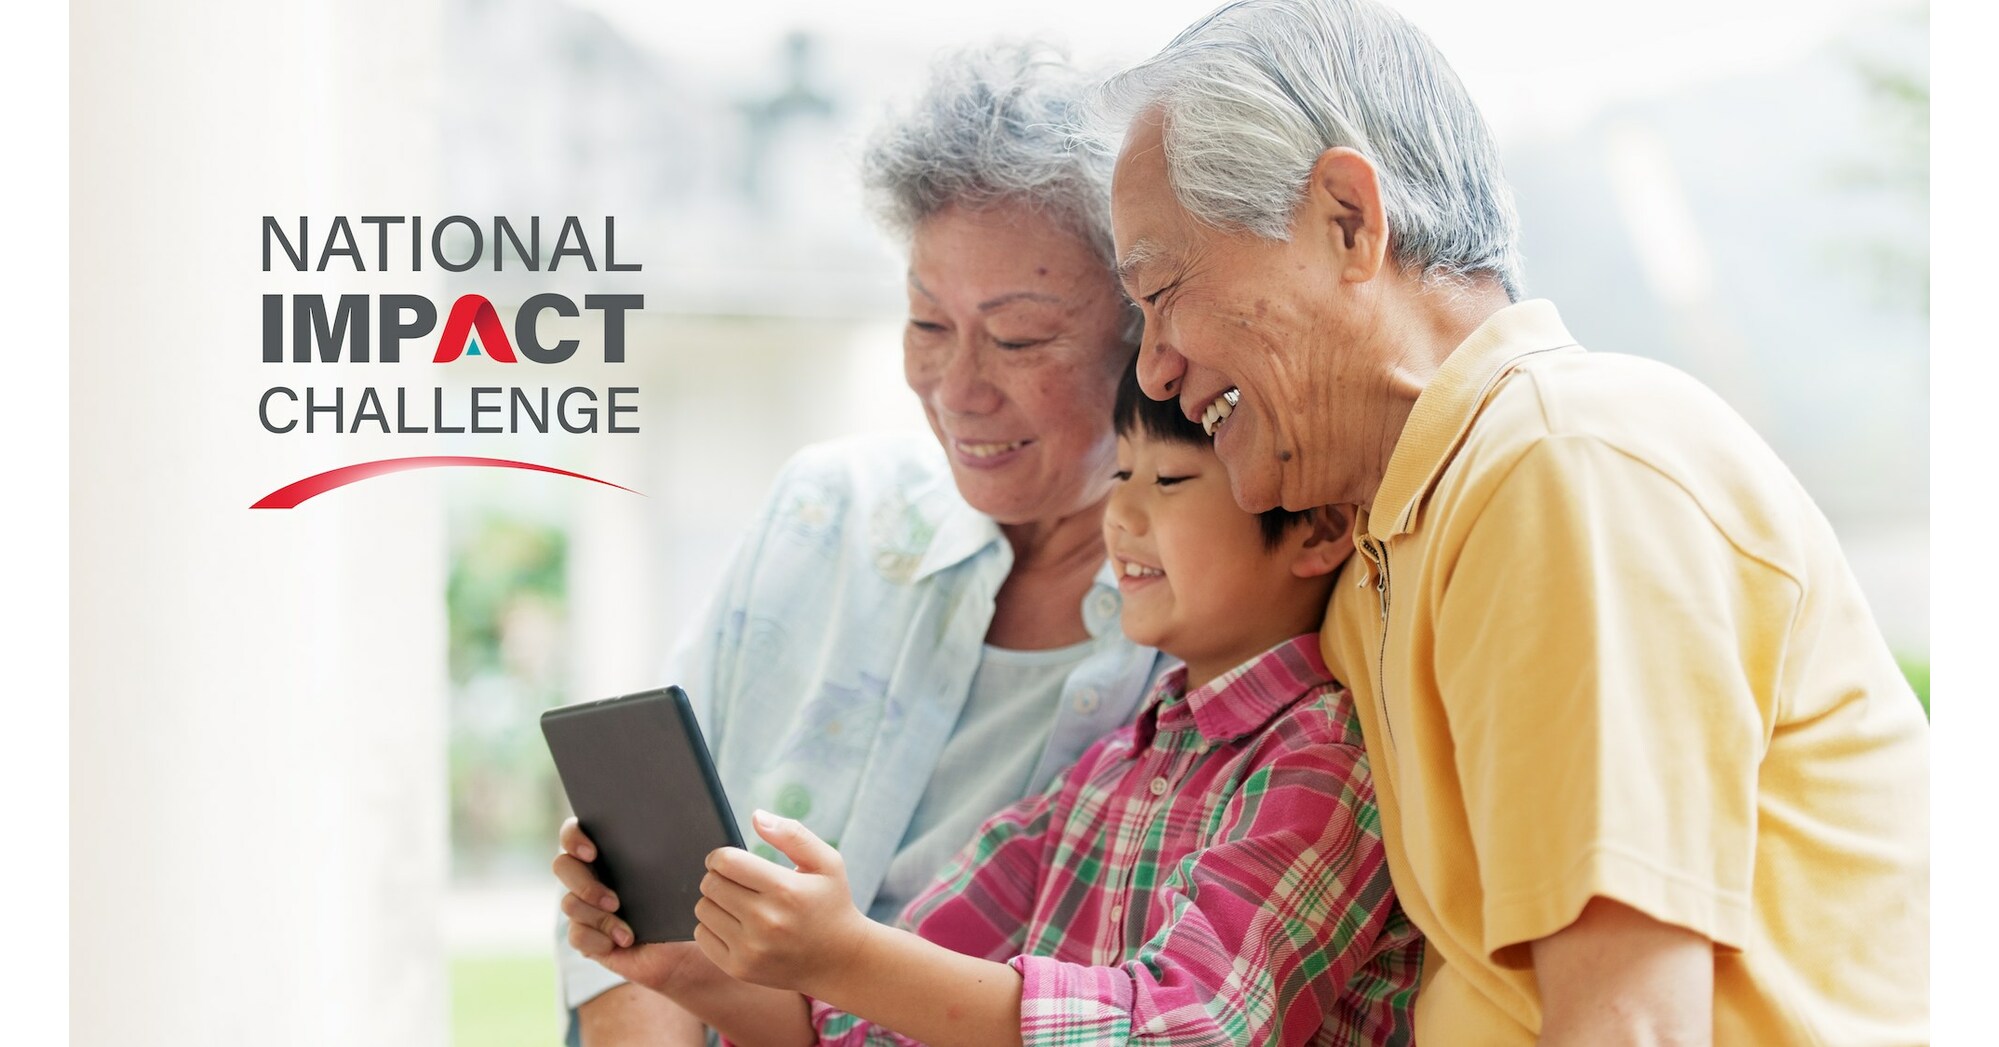 AGE-WELL and SE Health launch new competition for startups, community-based and youth-serving organizations innovating to support older adults